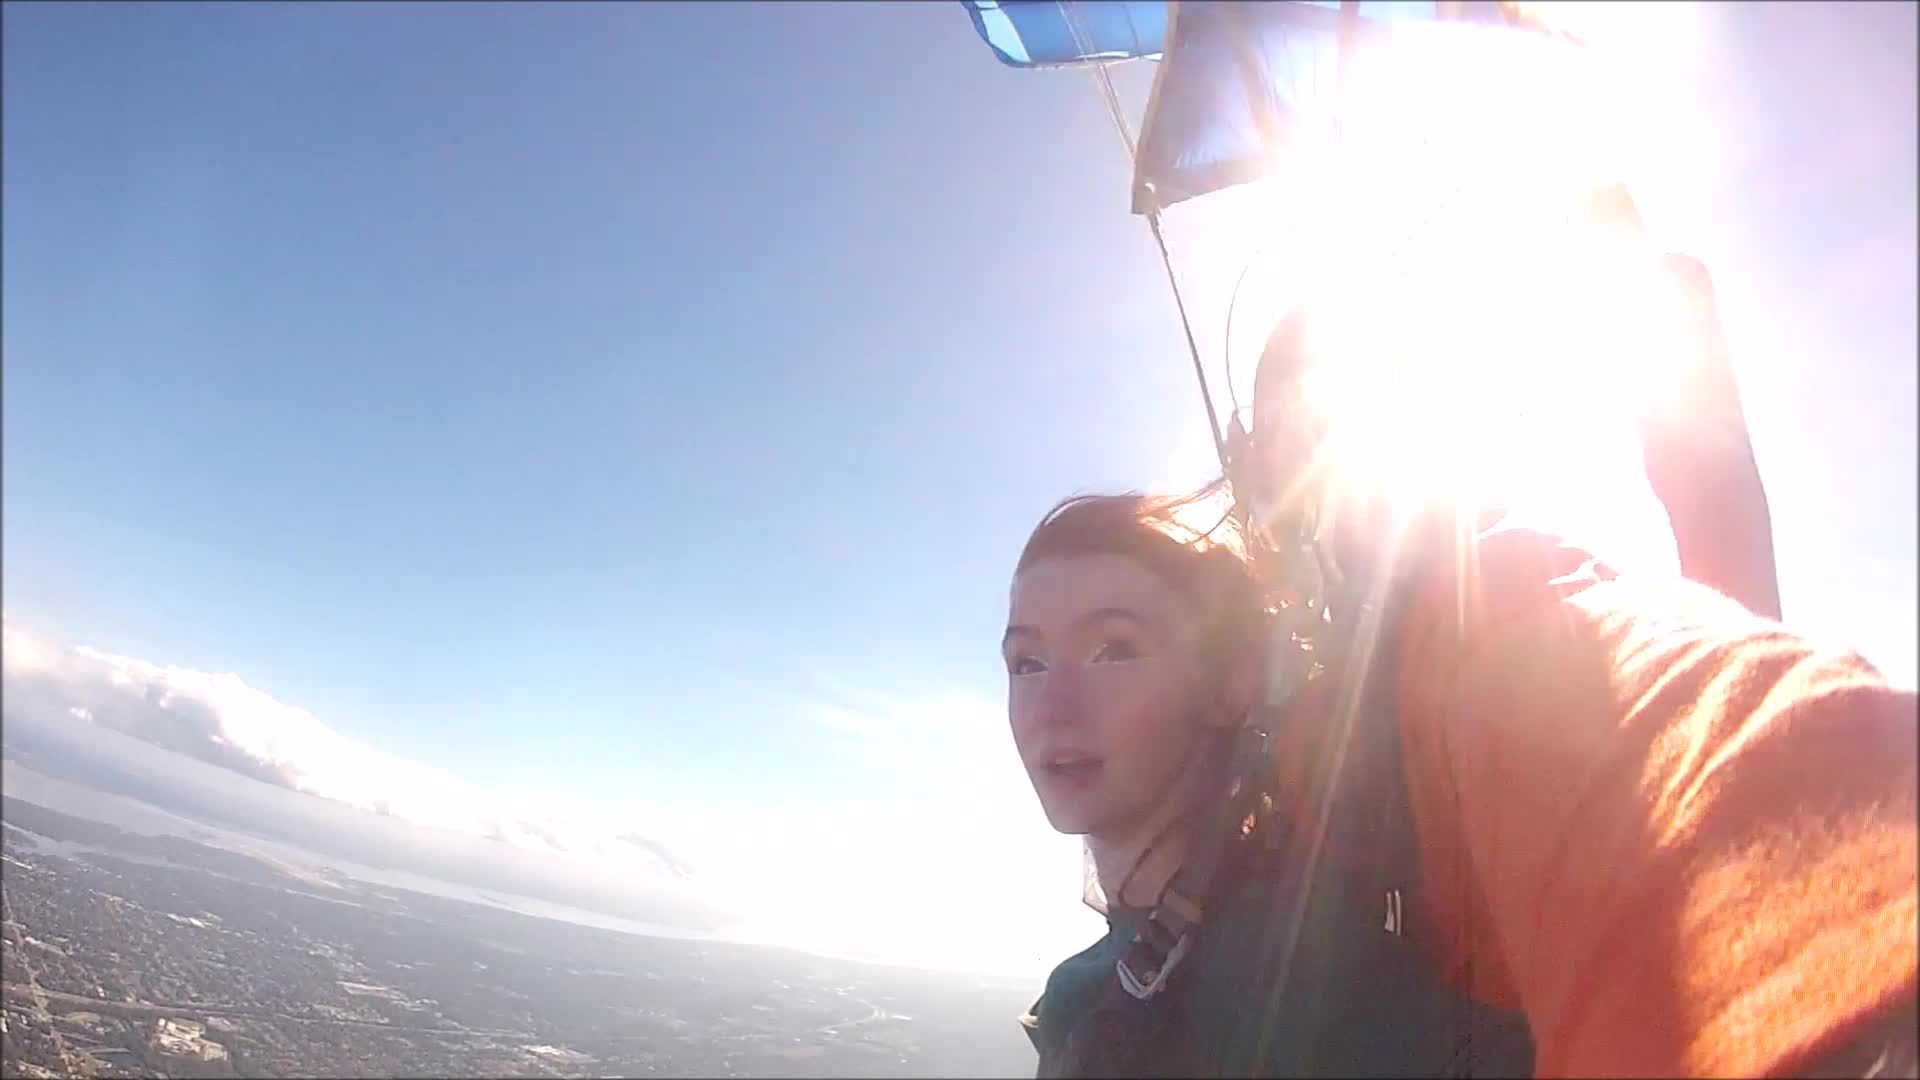 Literally just me skydiving